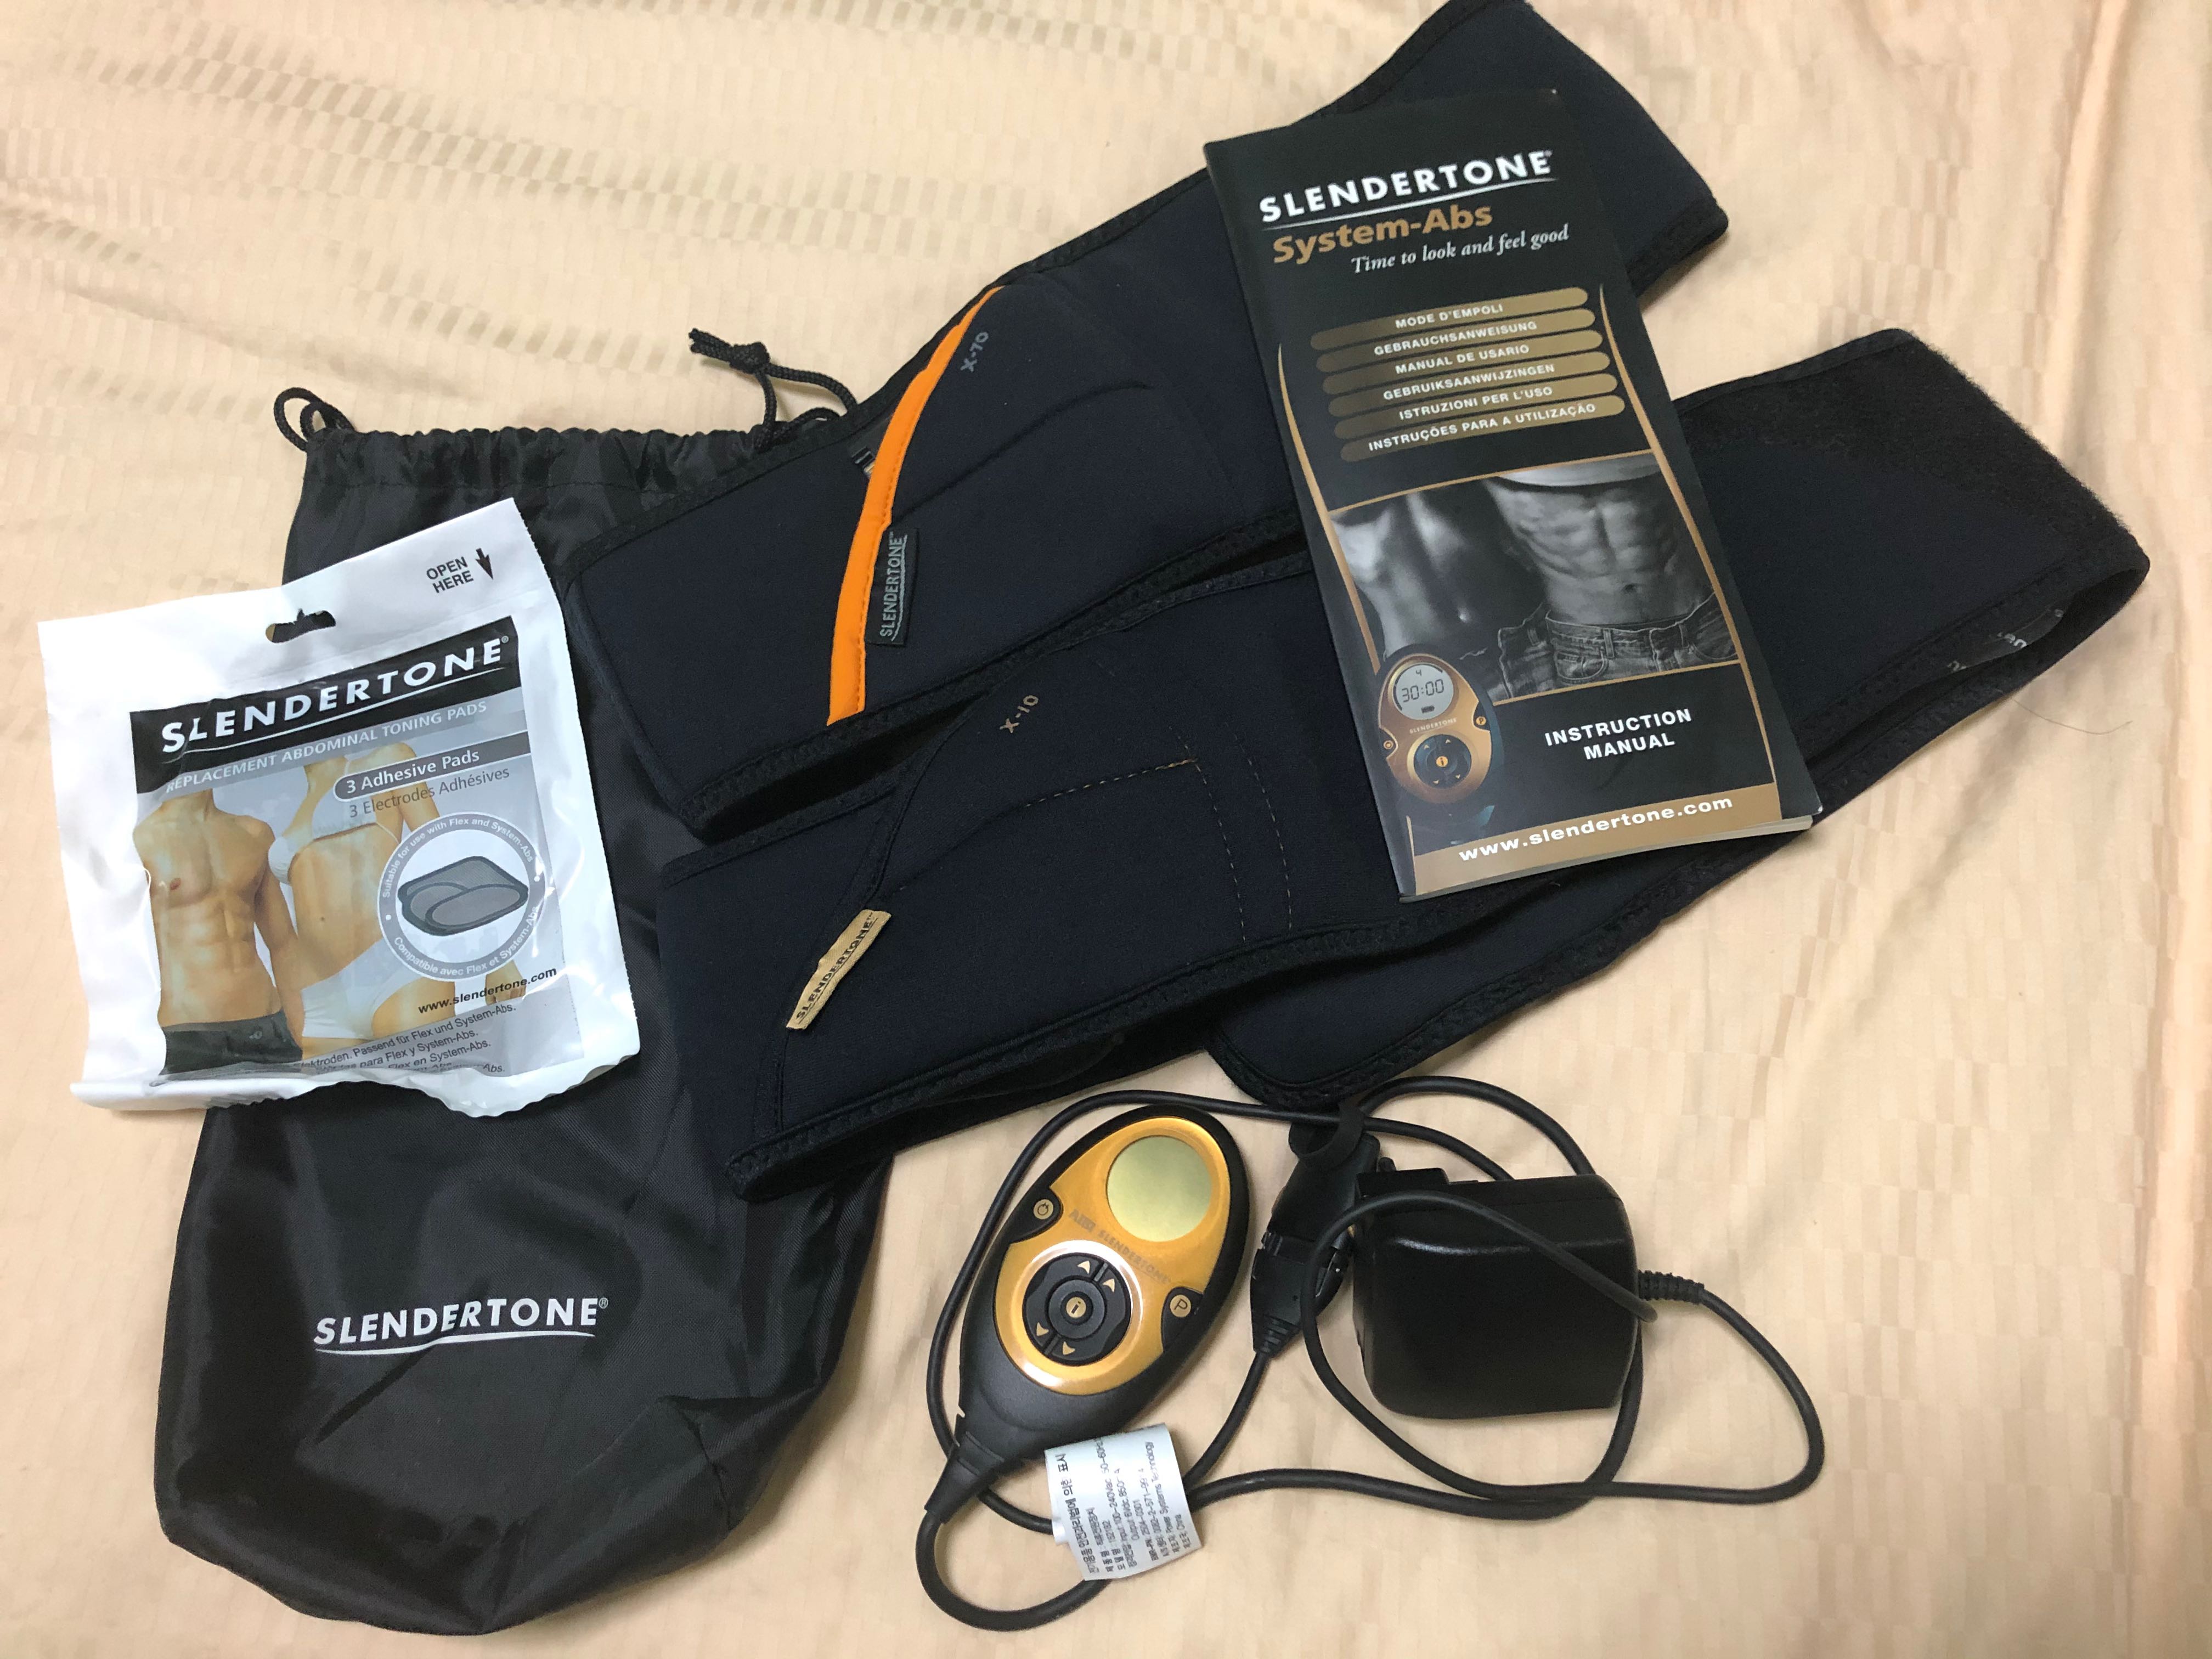 Replacement Pads Compatible with Slendertone Arms Unisex